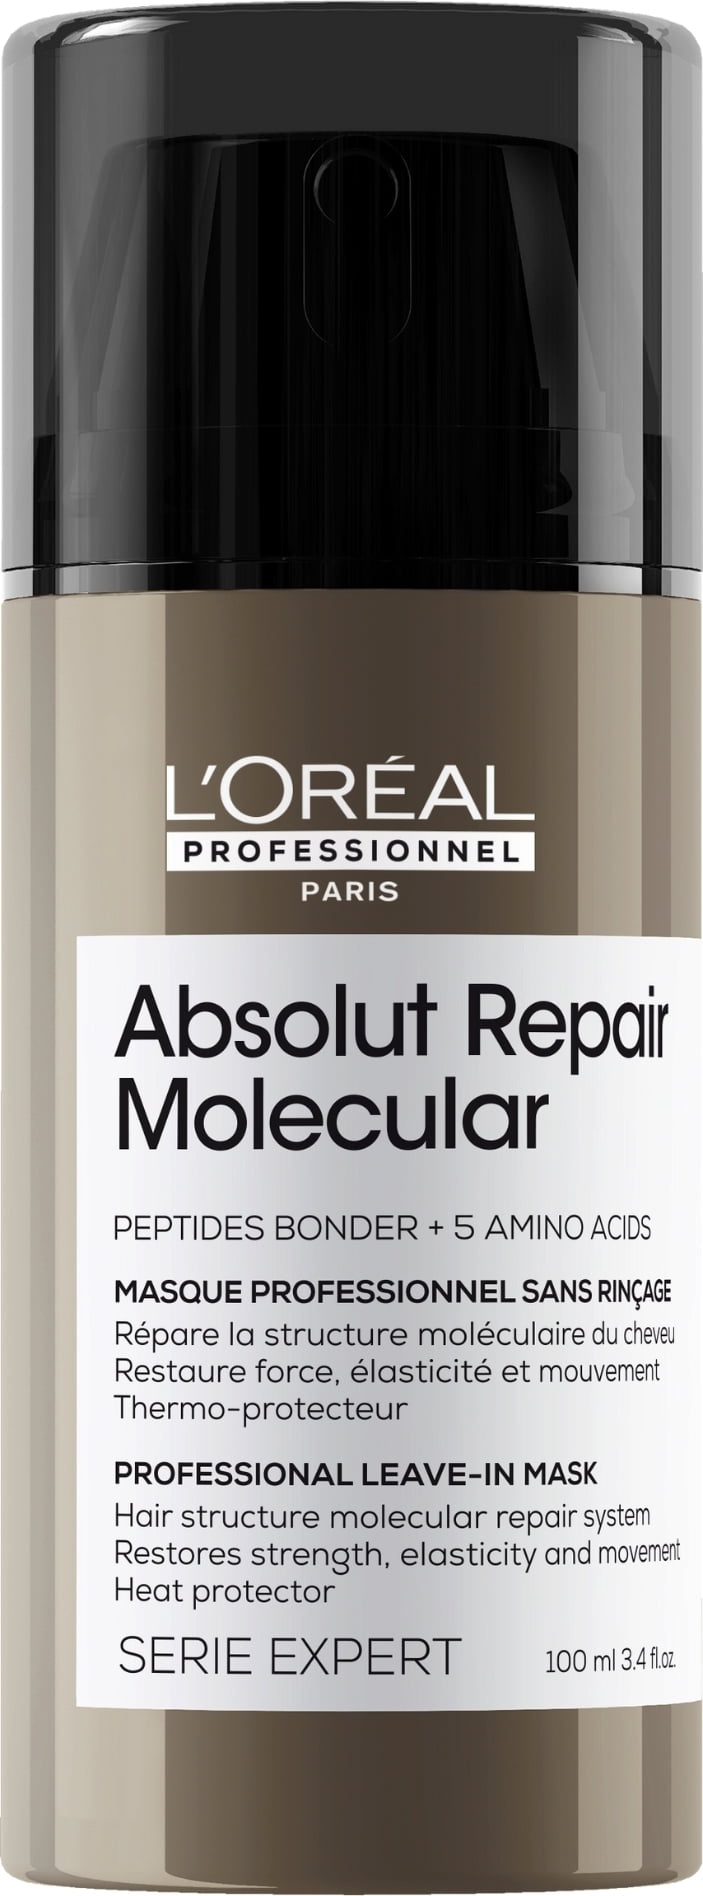 L'Oreal Professionnel Absolut Repair Molecular Professional Leave-In Mask